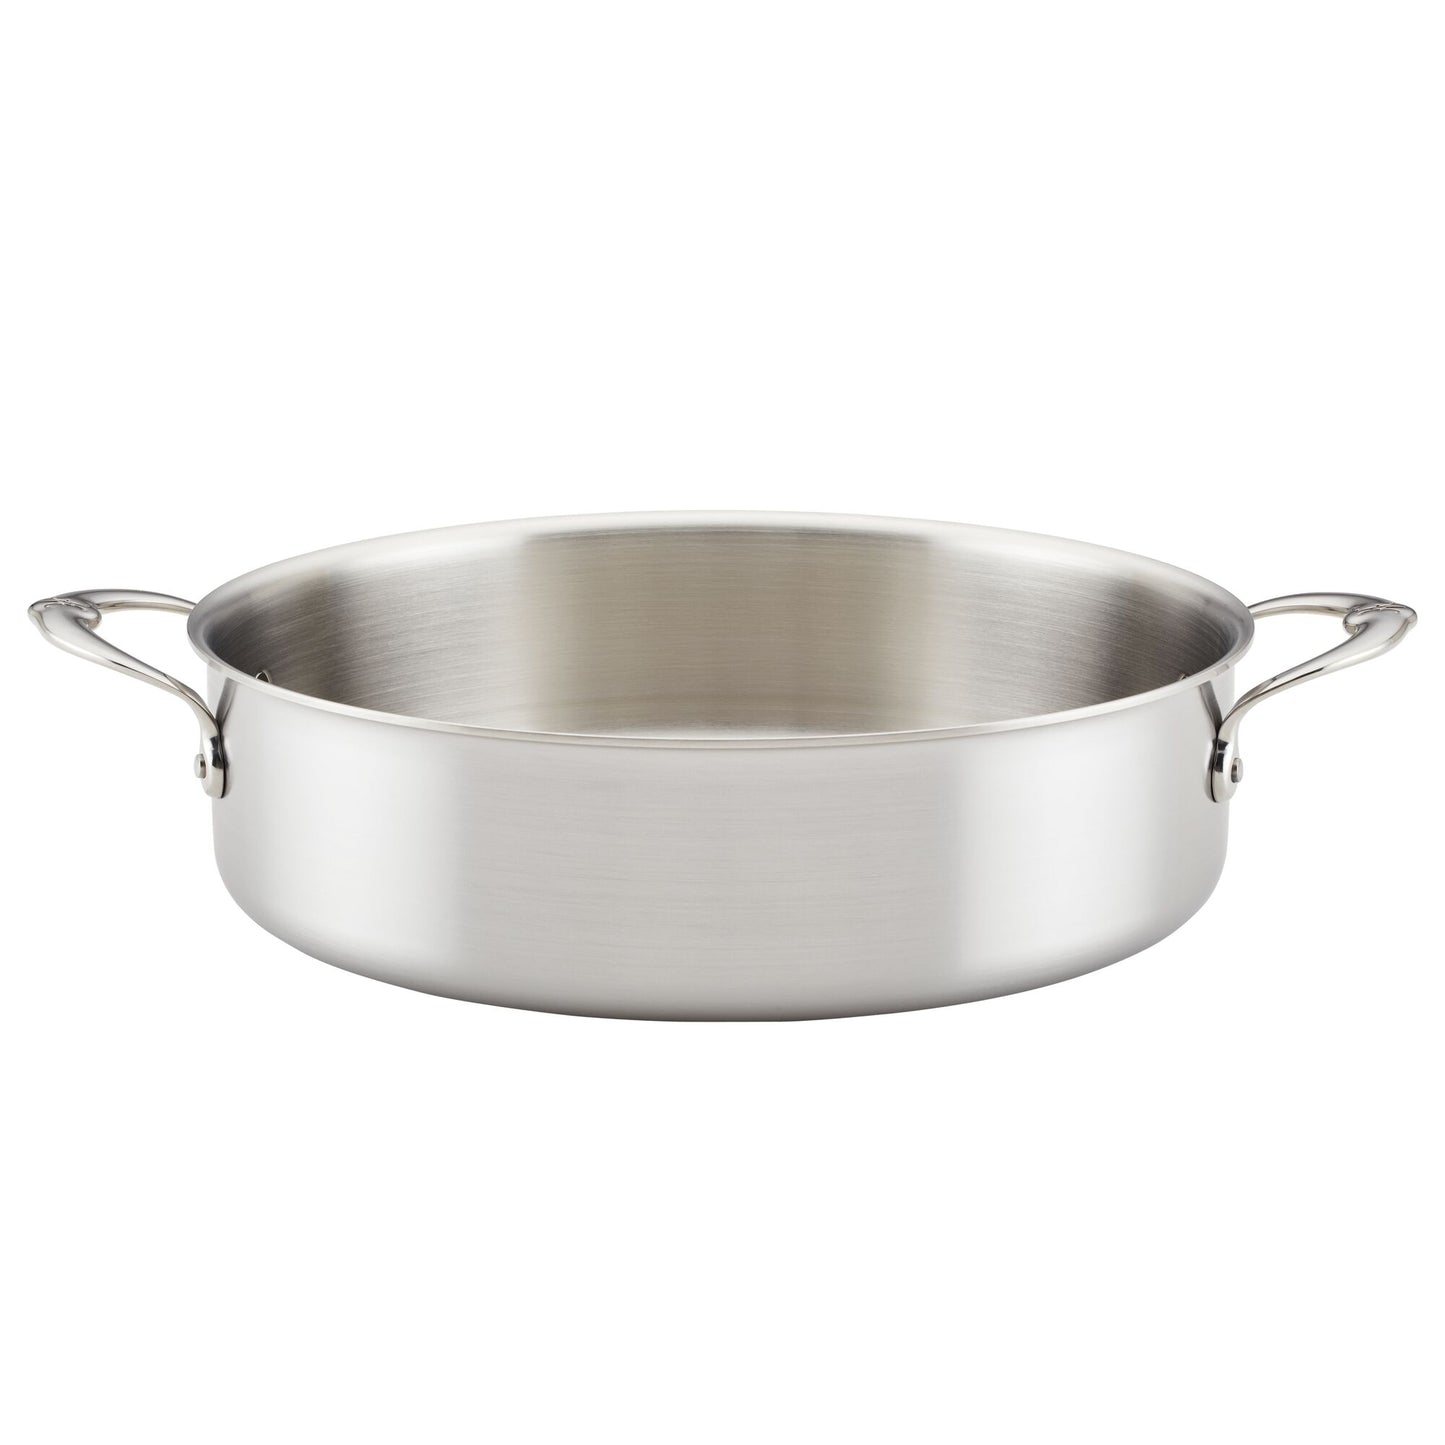 Hestan Thomas Keller Insignia Commercial Clad Stainless Steel Sauteuse 30cm/5.7L